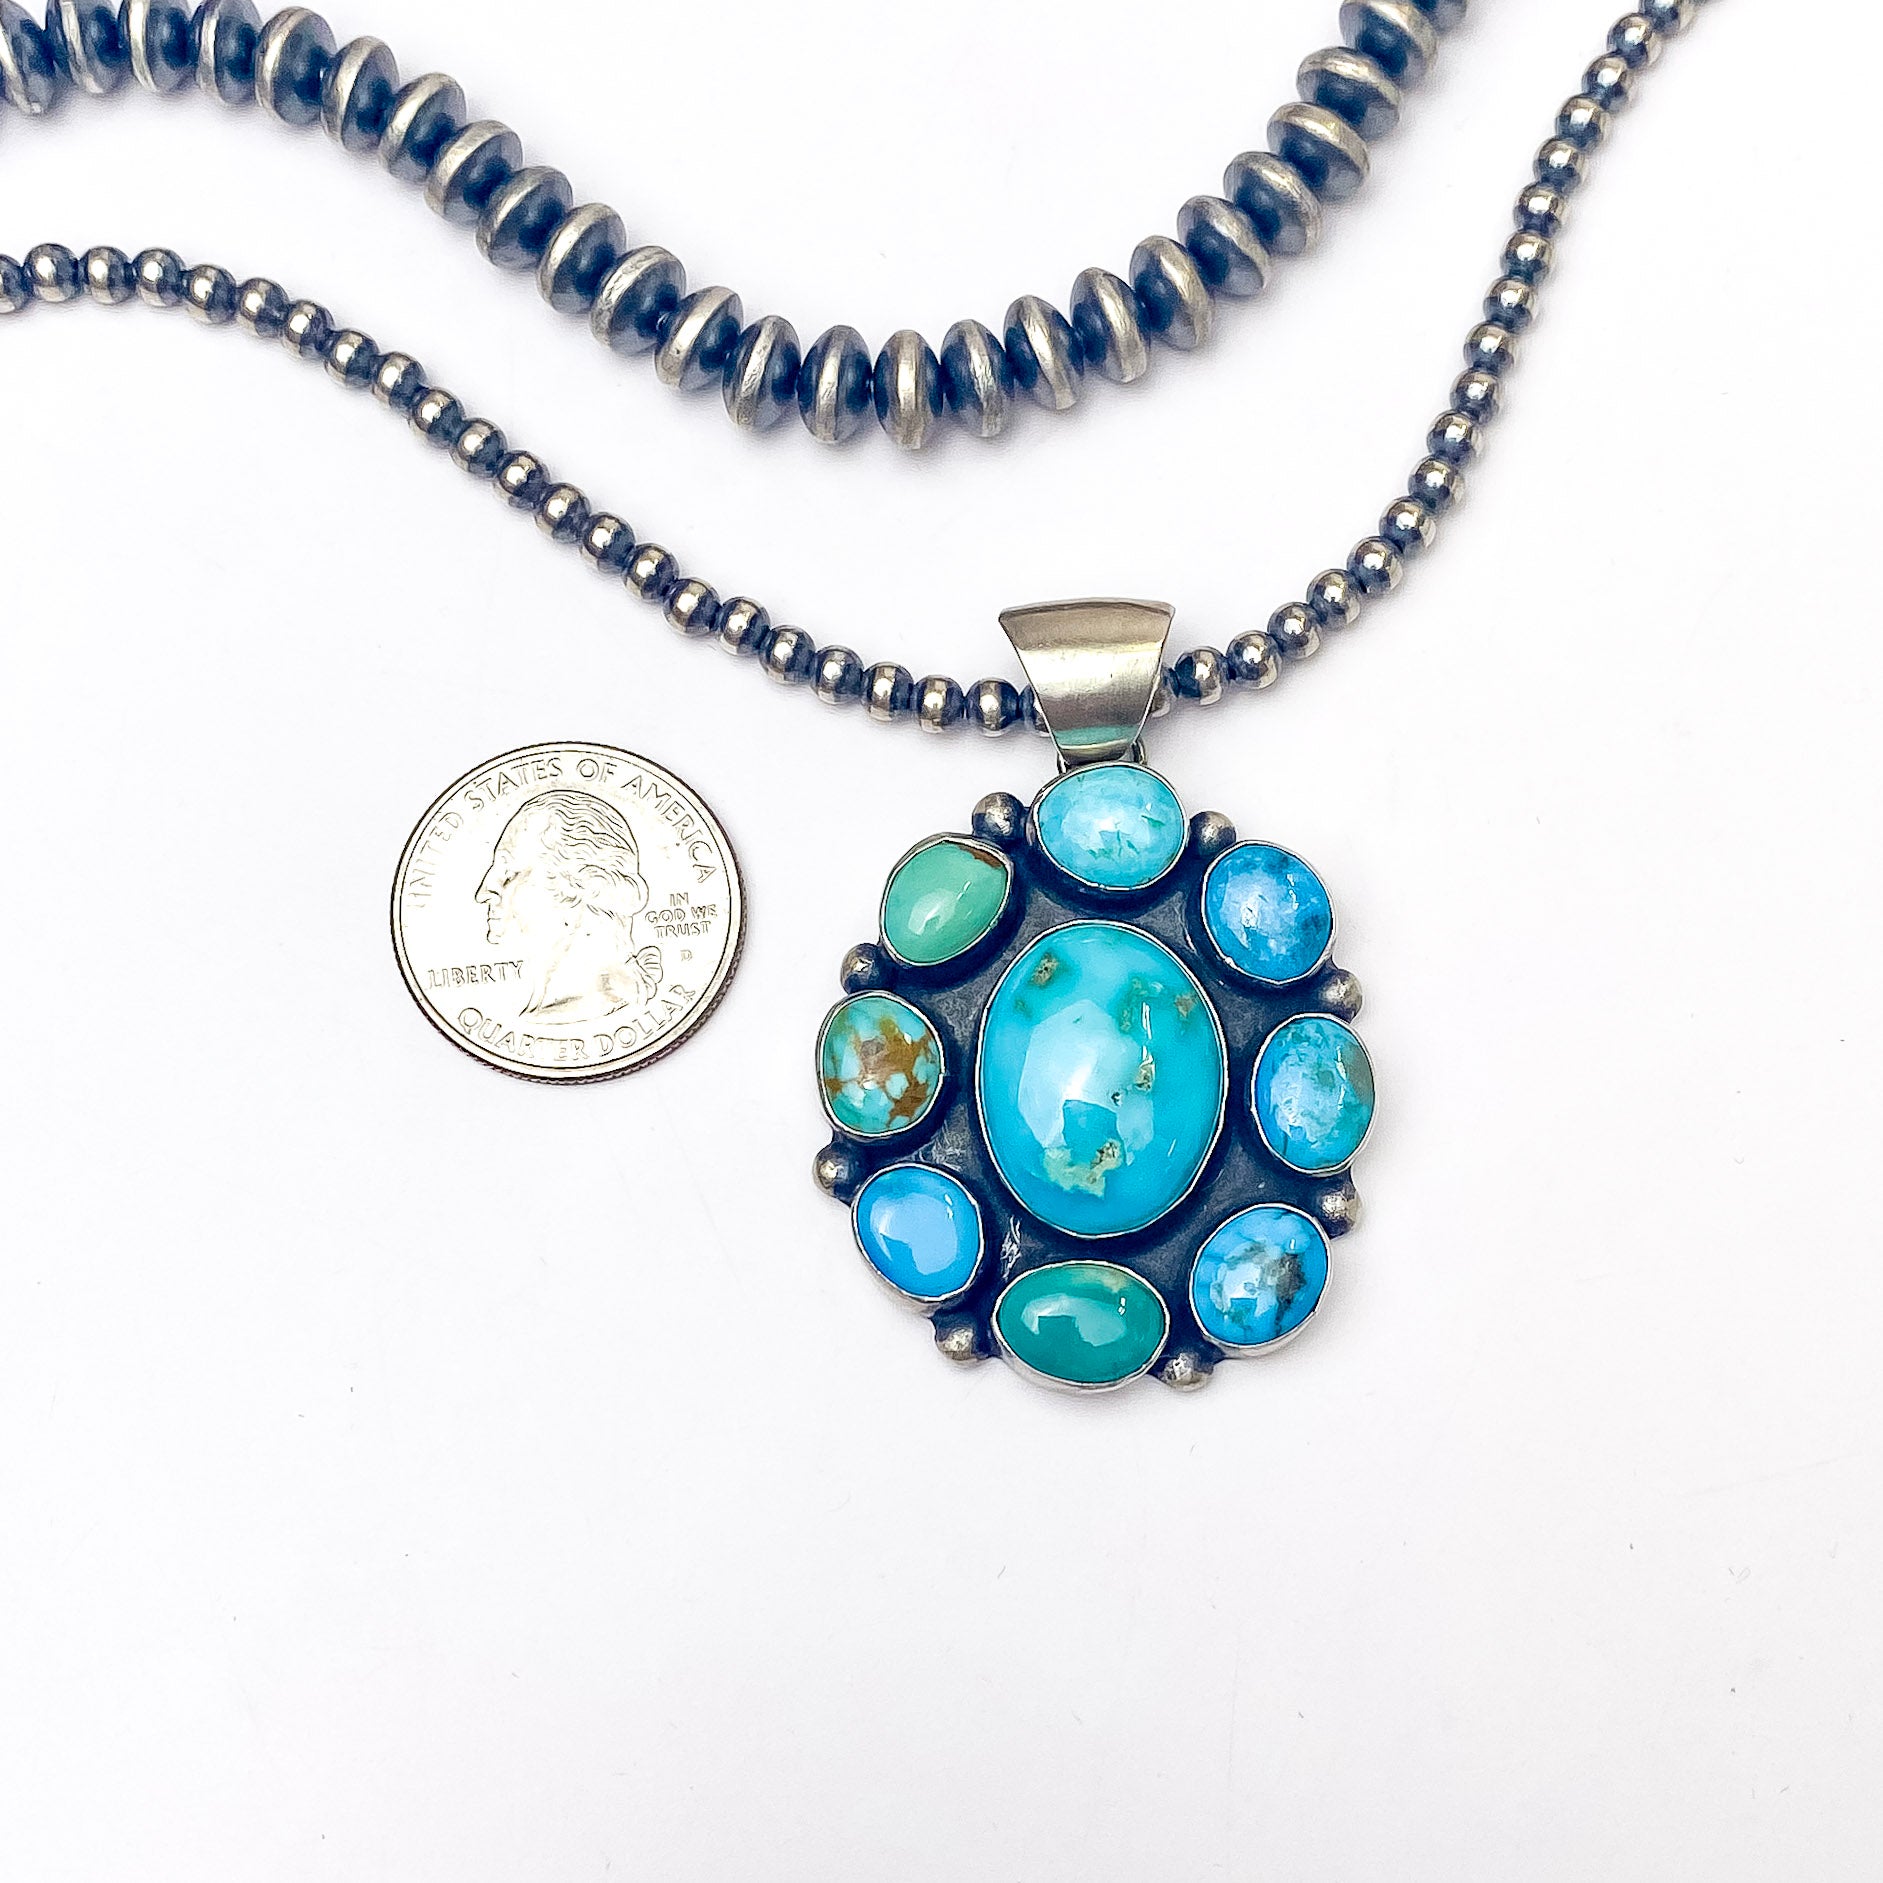 Augustine Largo | Navajo Handmade Sterling Silver Cluster Pendant with Kingman Turquoise Stone - Giddy Up Glamour Boutique